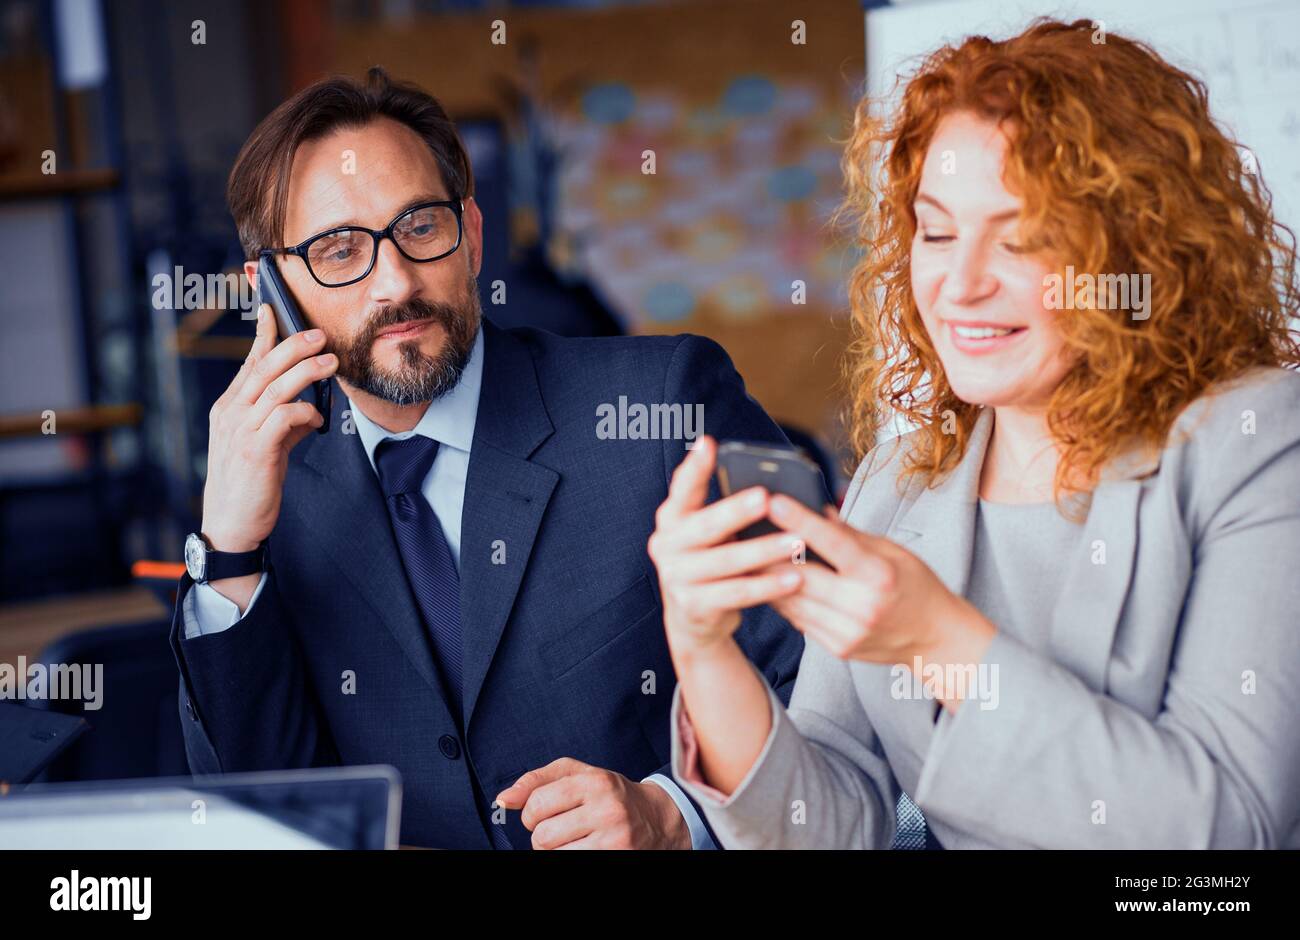 Businessman and businesswoman at working space communicating on phone. Stock Photo